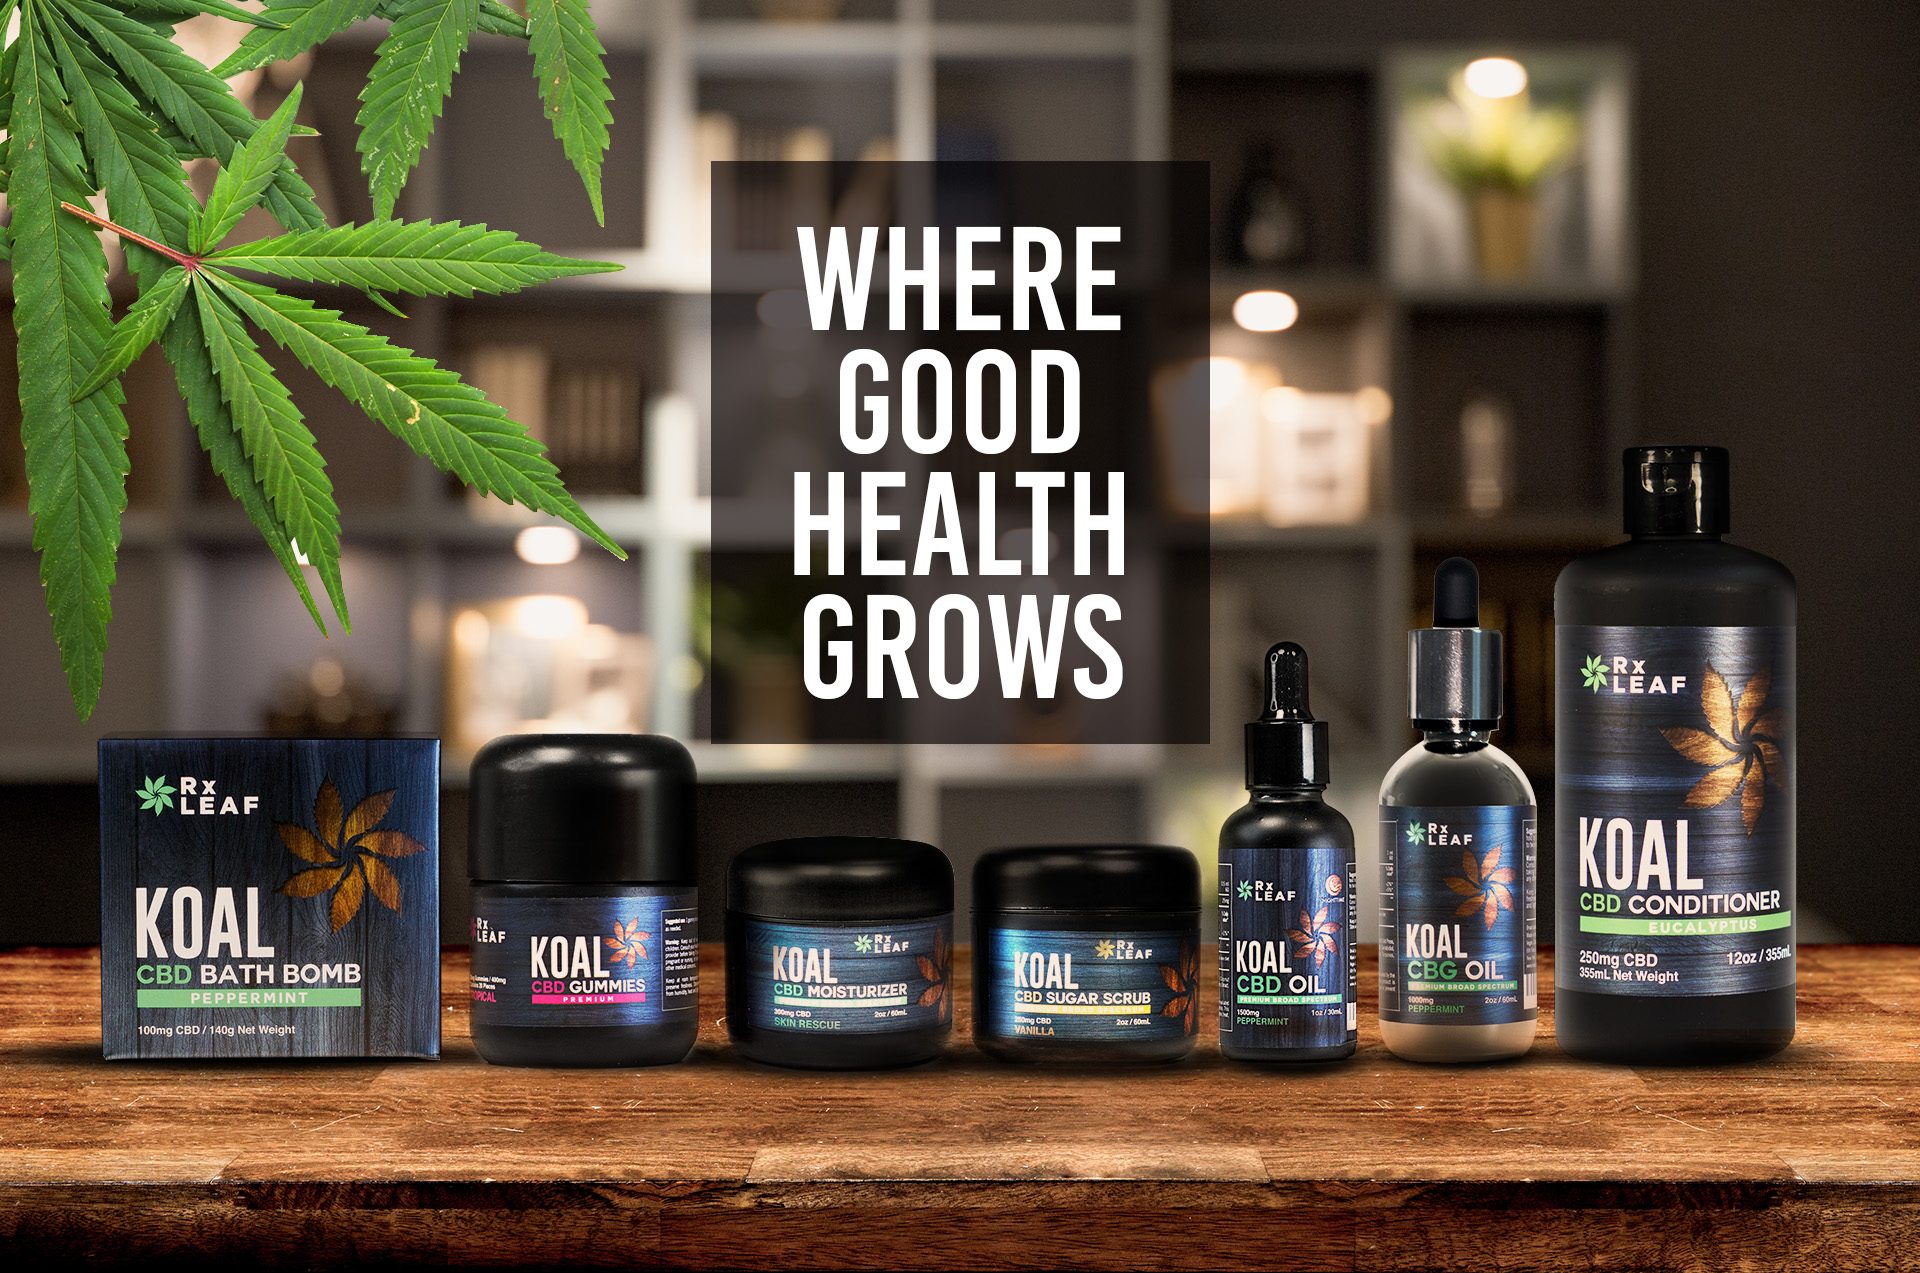 CBD products by RxLeaf lined up in banner ad